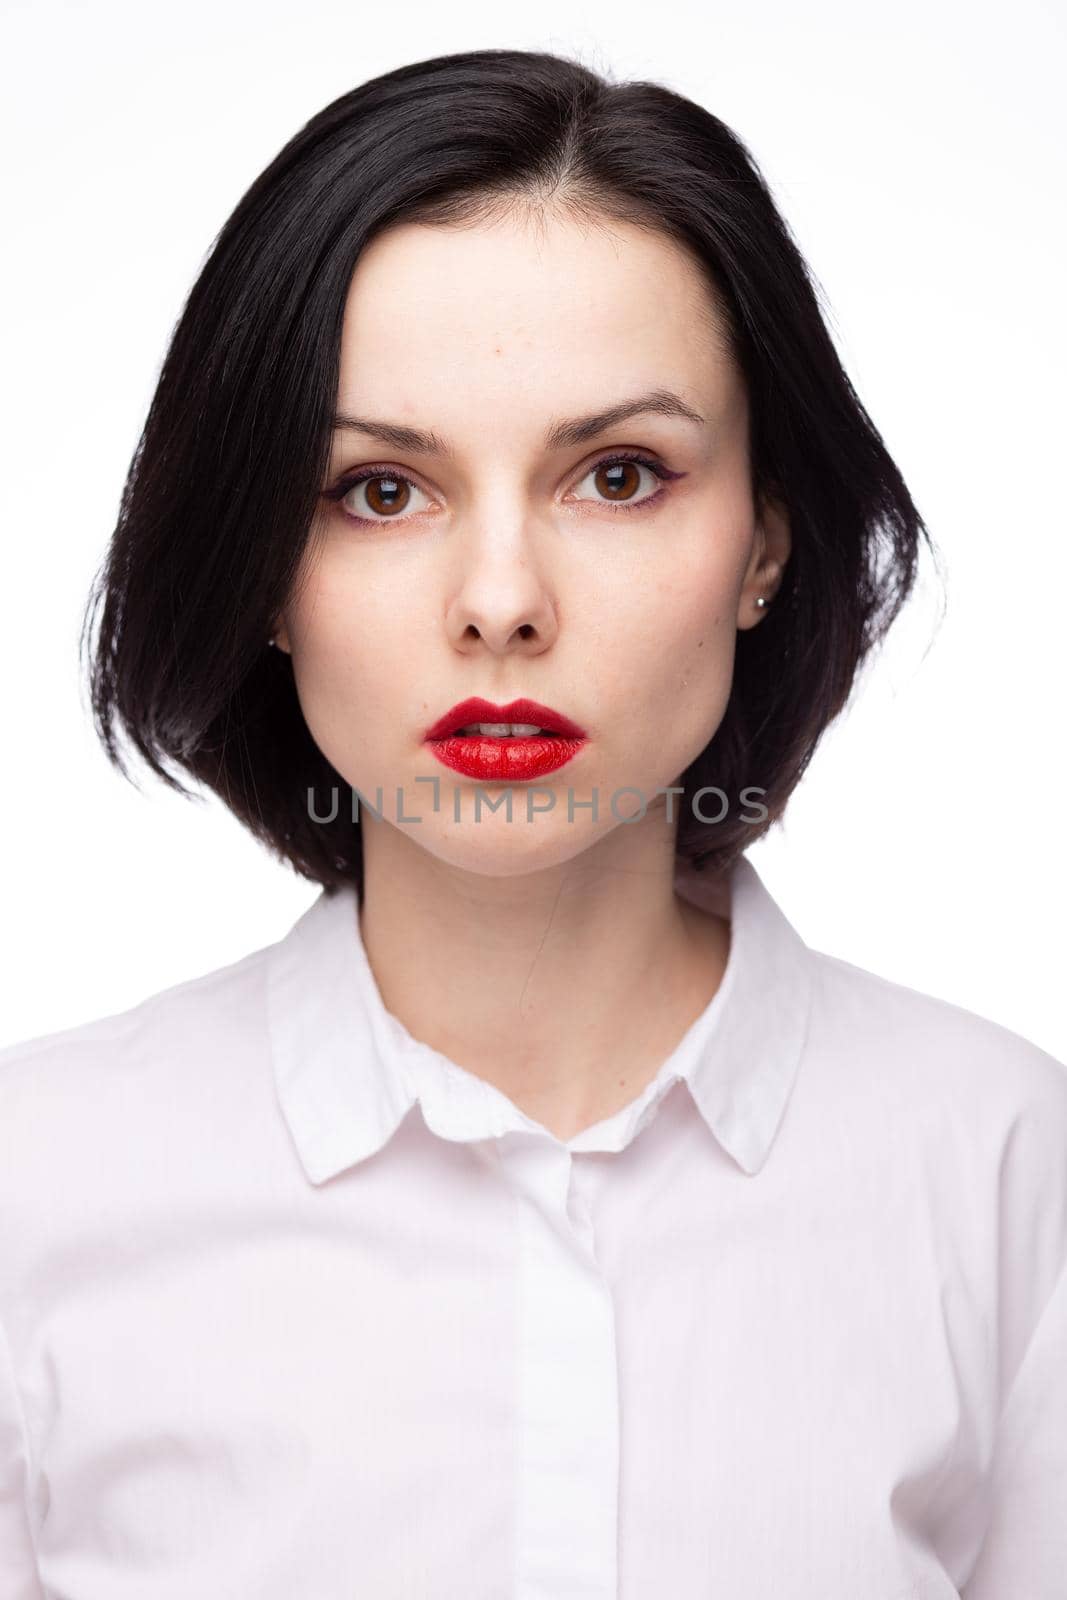 brunette woman with red lipstick on her lips in white shirt, white background by shilovskaya